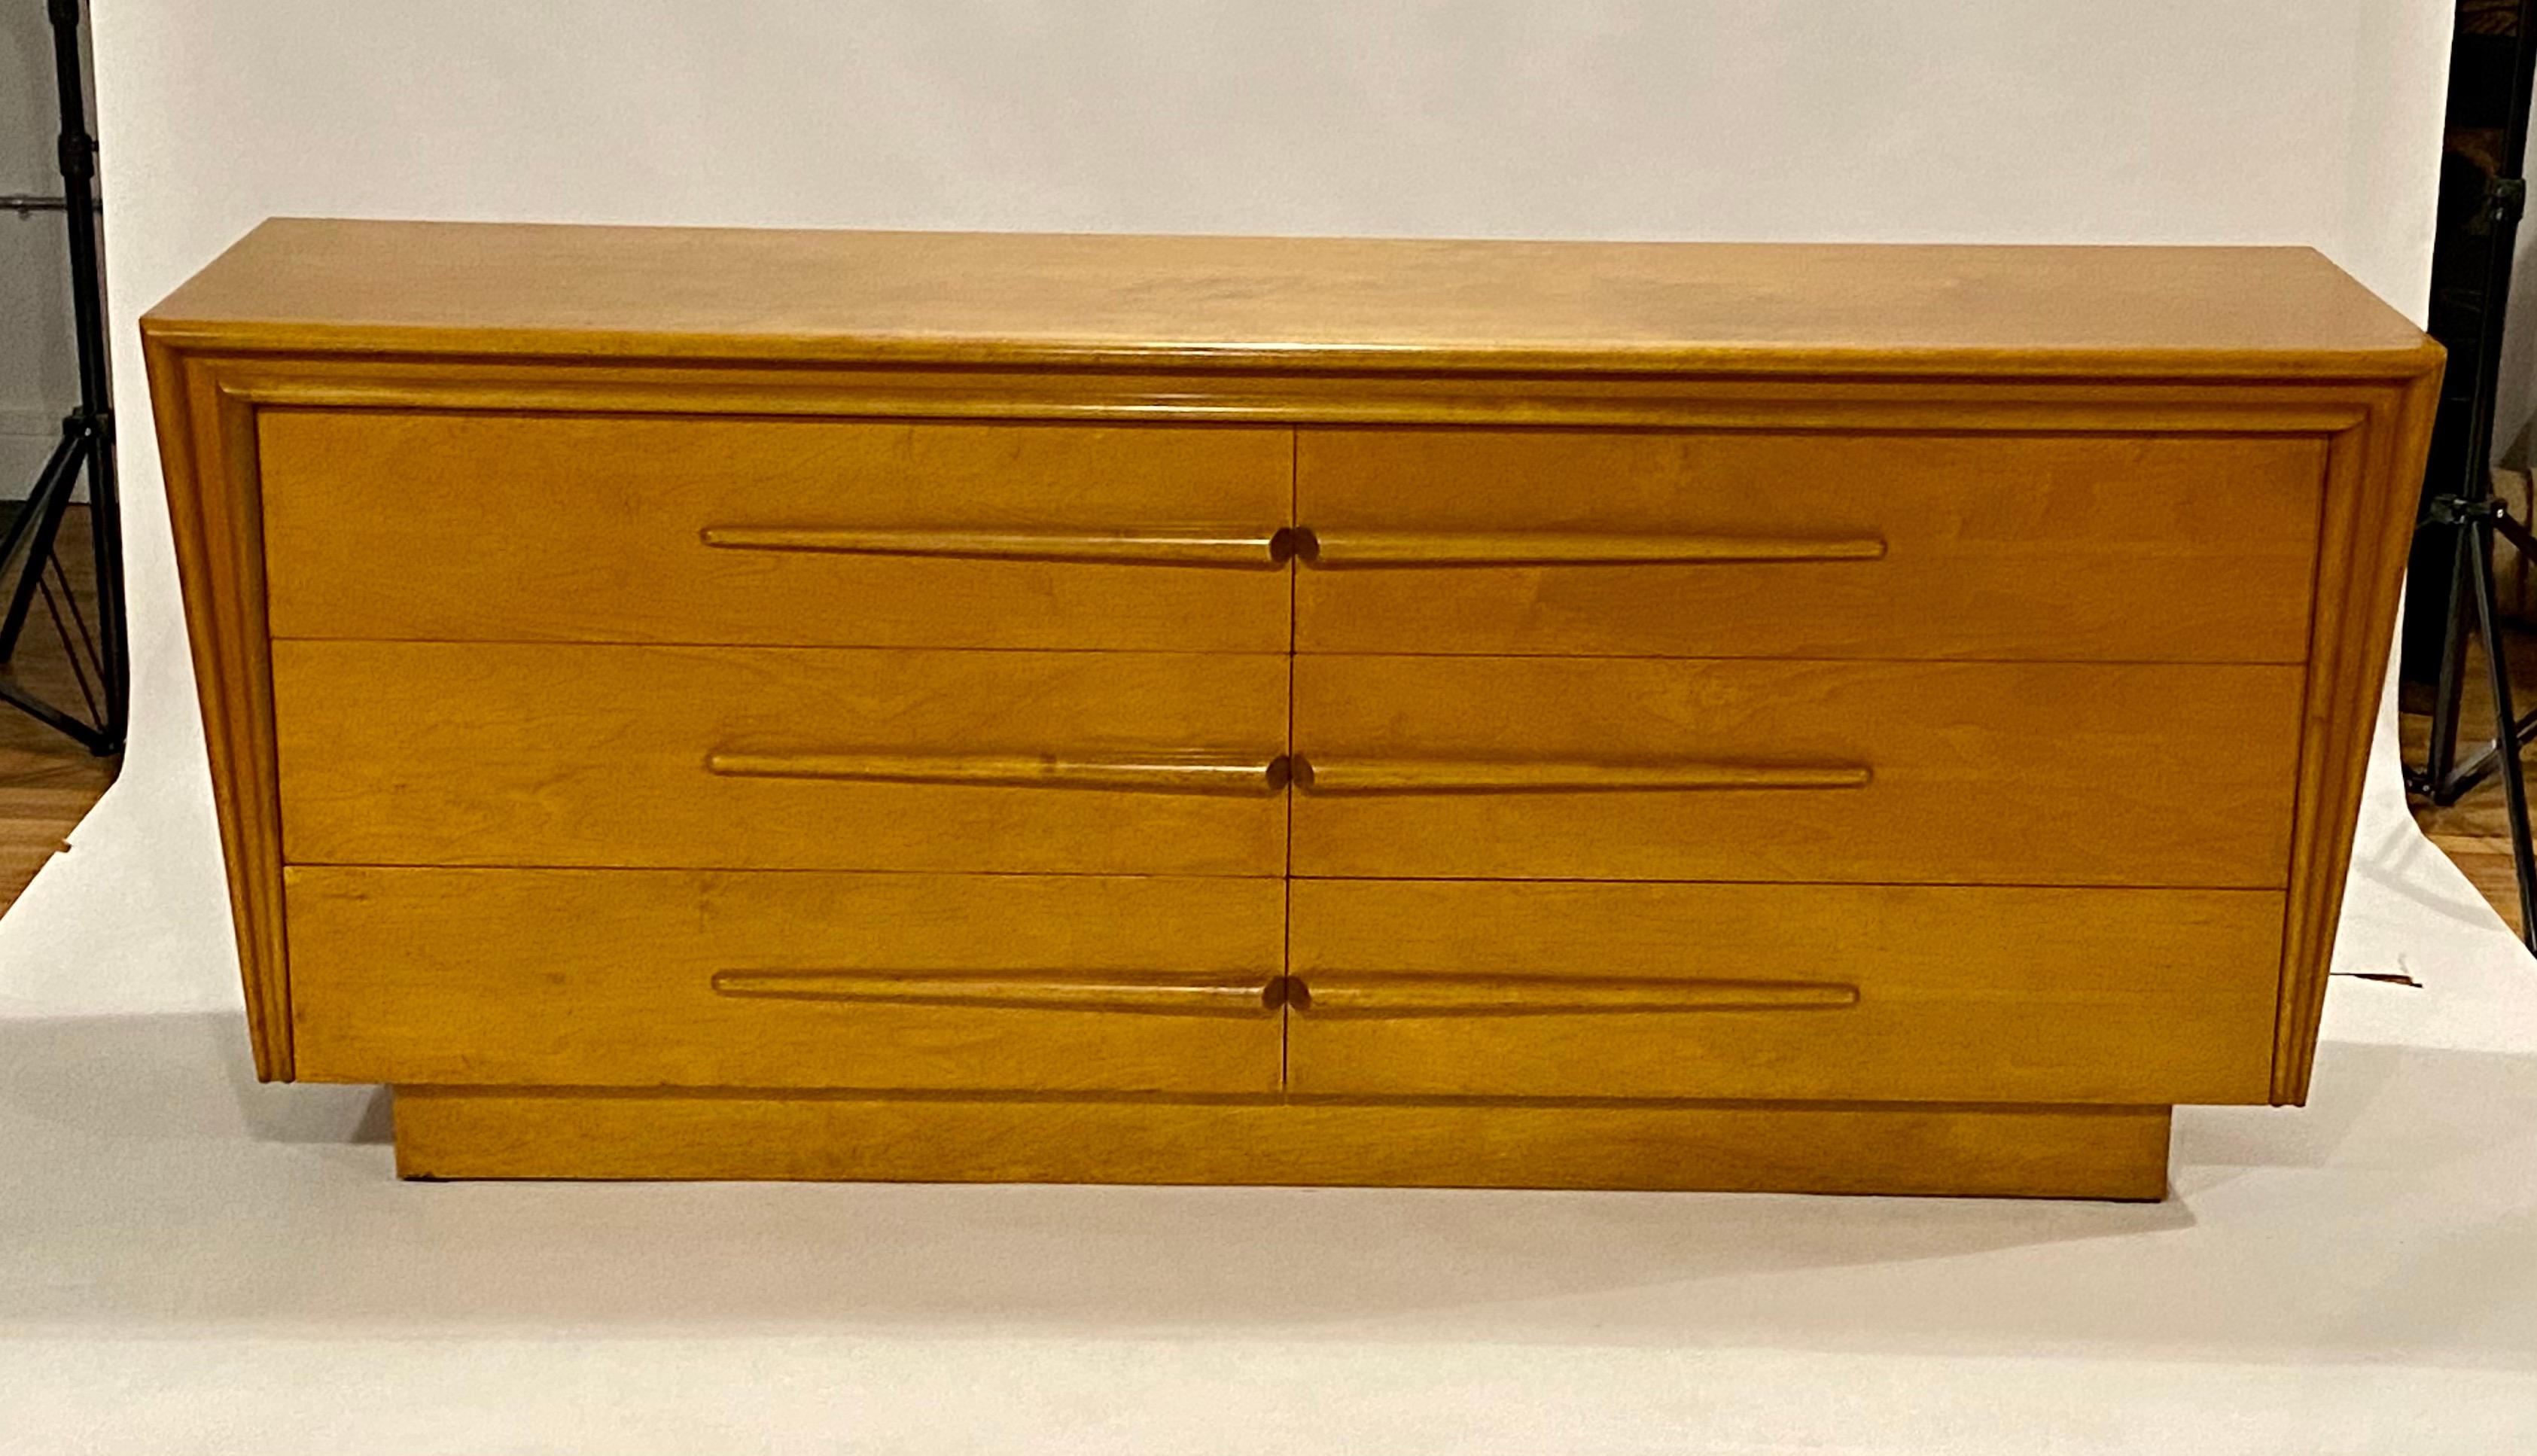 Mid-century maple wood dresser by Edmond Spence executed in a remarkable Danish Modern / Art Deco streamline design with 6-pullout / pull-out drawers and two removable accessory trays. This dresser is amazingly clean for its age inside and out,